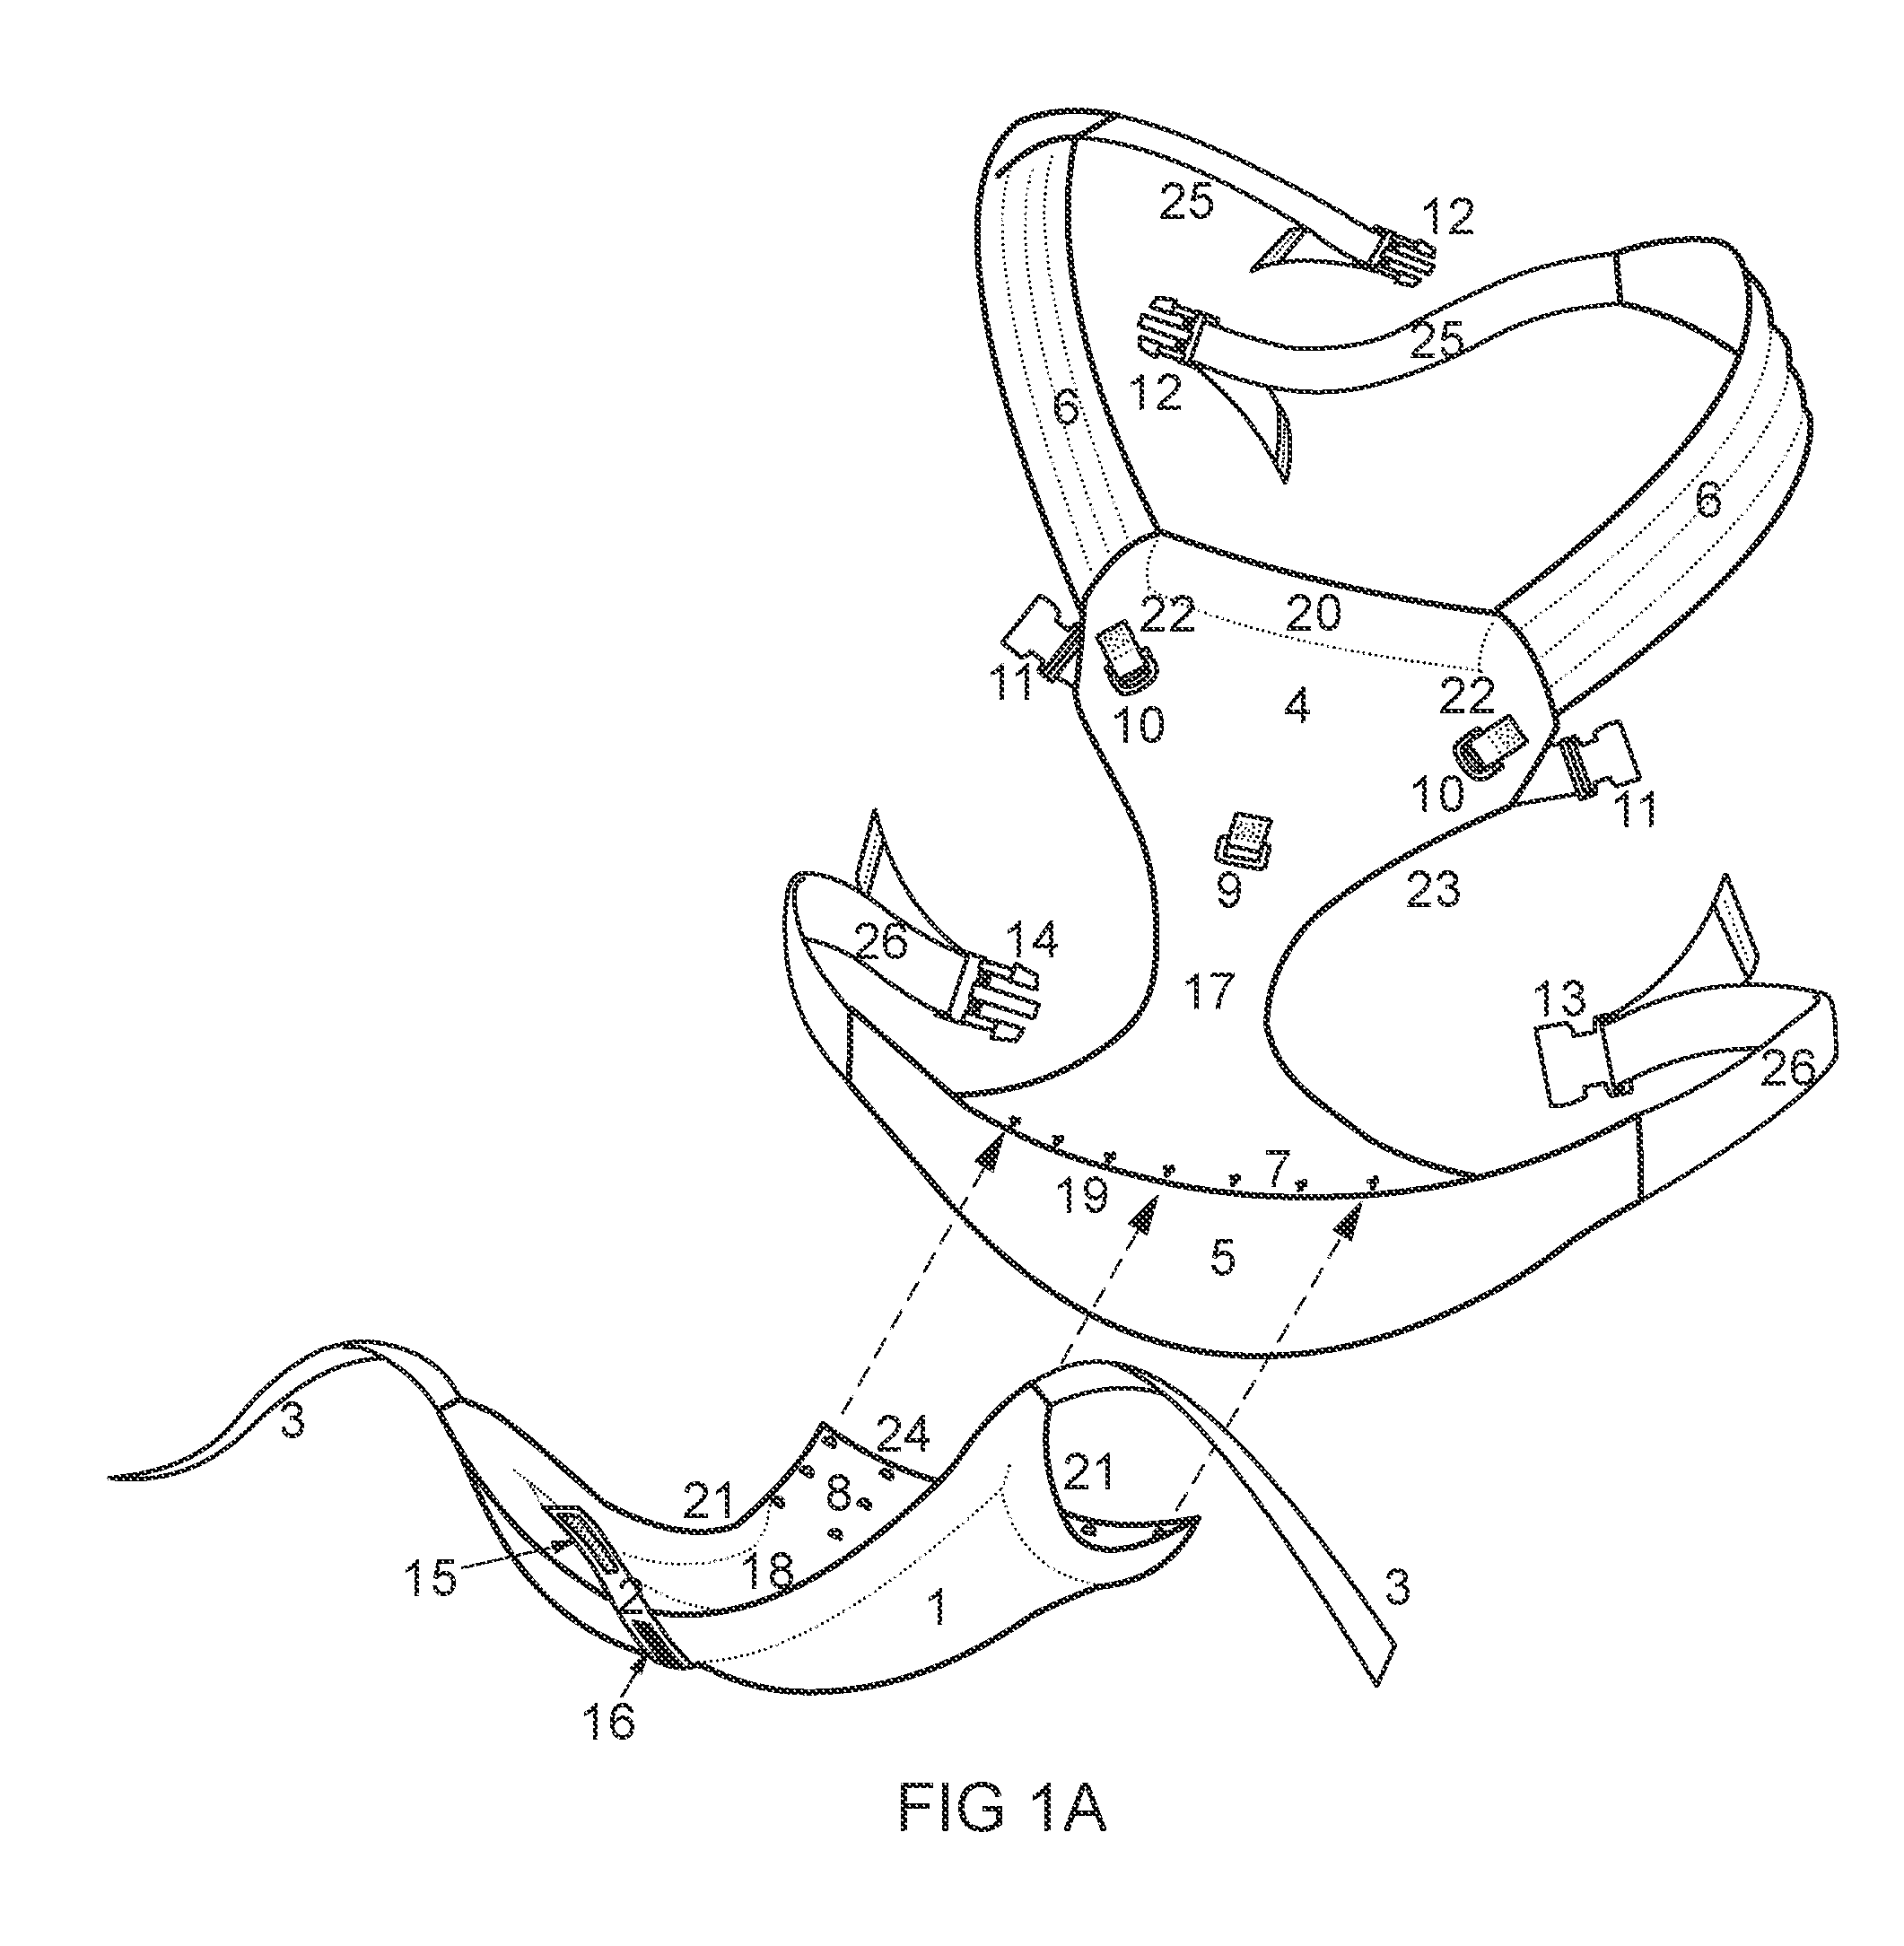 Apparatus for a baby carrier